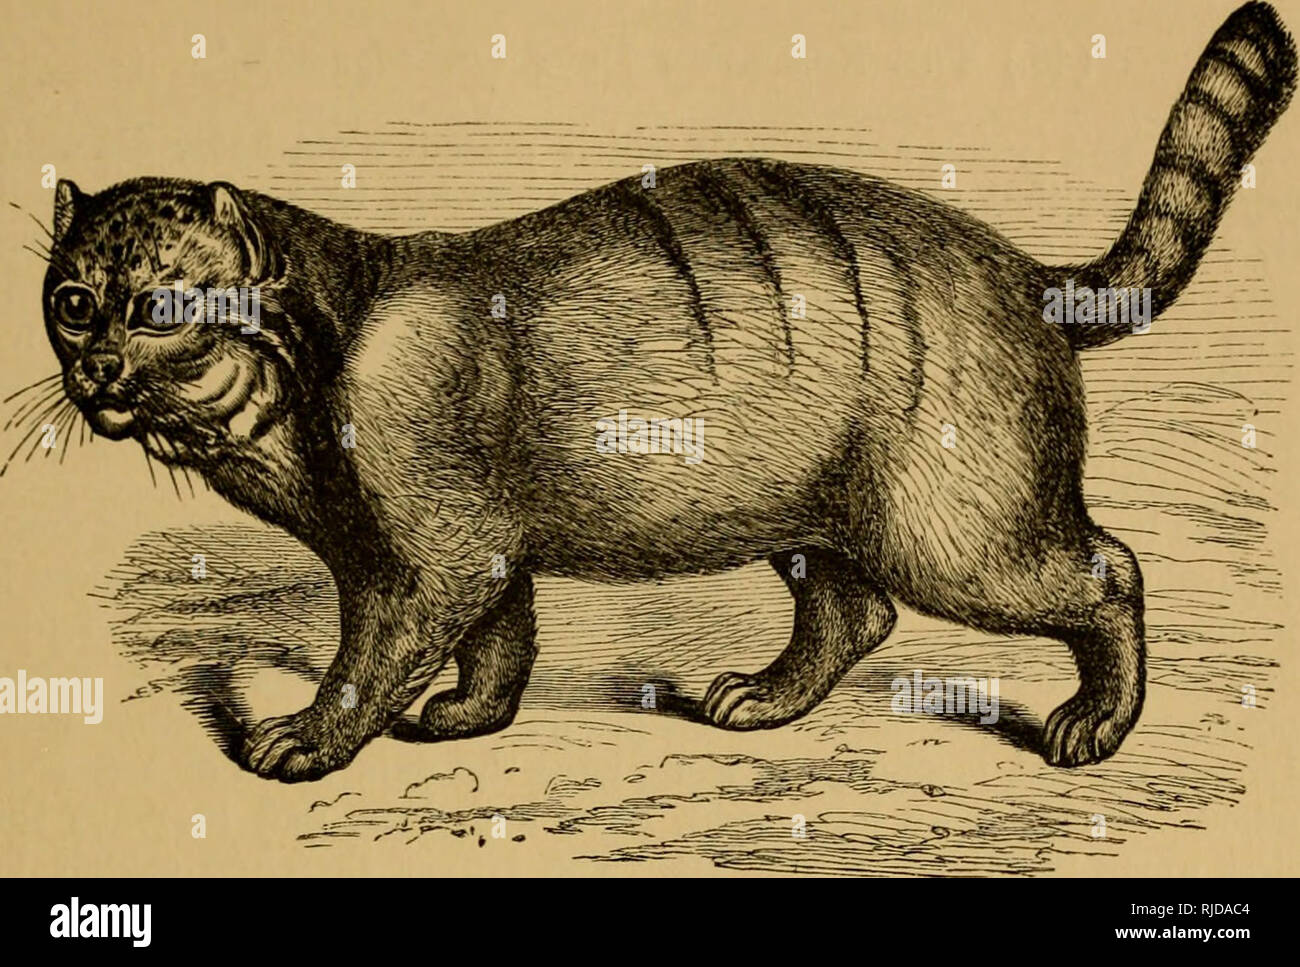 . The cat; an introduction to the study of backboned animals, especially mammals. Cats; Anatomy, Comparative. CHAP. XII.] DIFFERENT KINDS OF CATS. 423. Fig. 179.—The Manul (f. Manul). (44.) The Straw or Pampas Cat {Felis pajeros).* This animal is about the size of our wild cat, but is more robust in build, with a smaller head and a shorter tail. The hair is long, and the colour of the body is yellowish-grey, marked with transverse bands of yellow or brown, which run obliquely from the back to the flanks. Two patches descend from the eyes over the cheeks, and meet beneath the throat. The animal Stock Photo